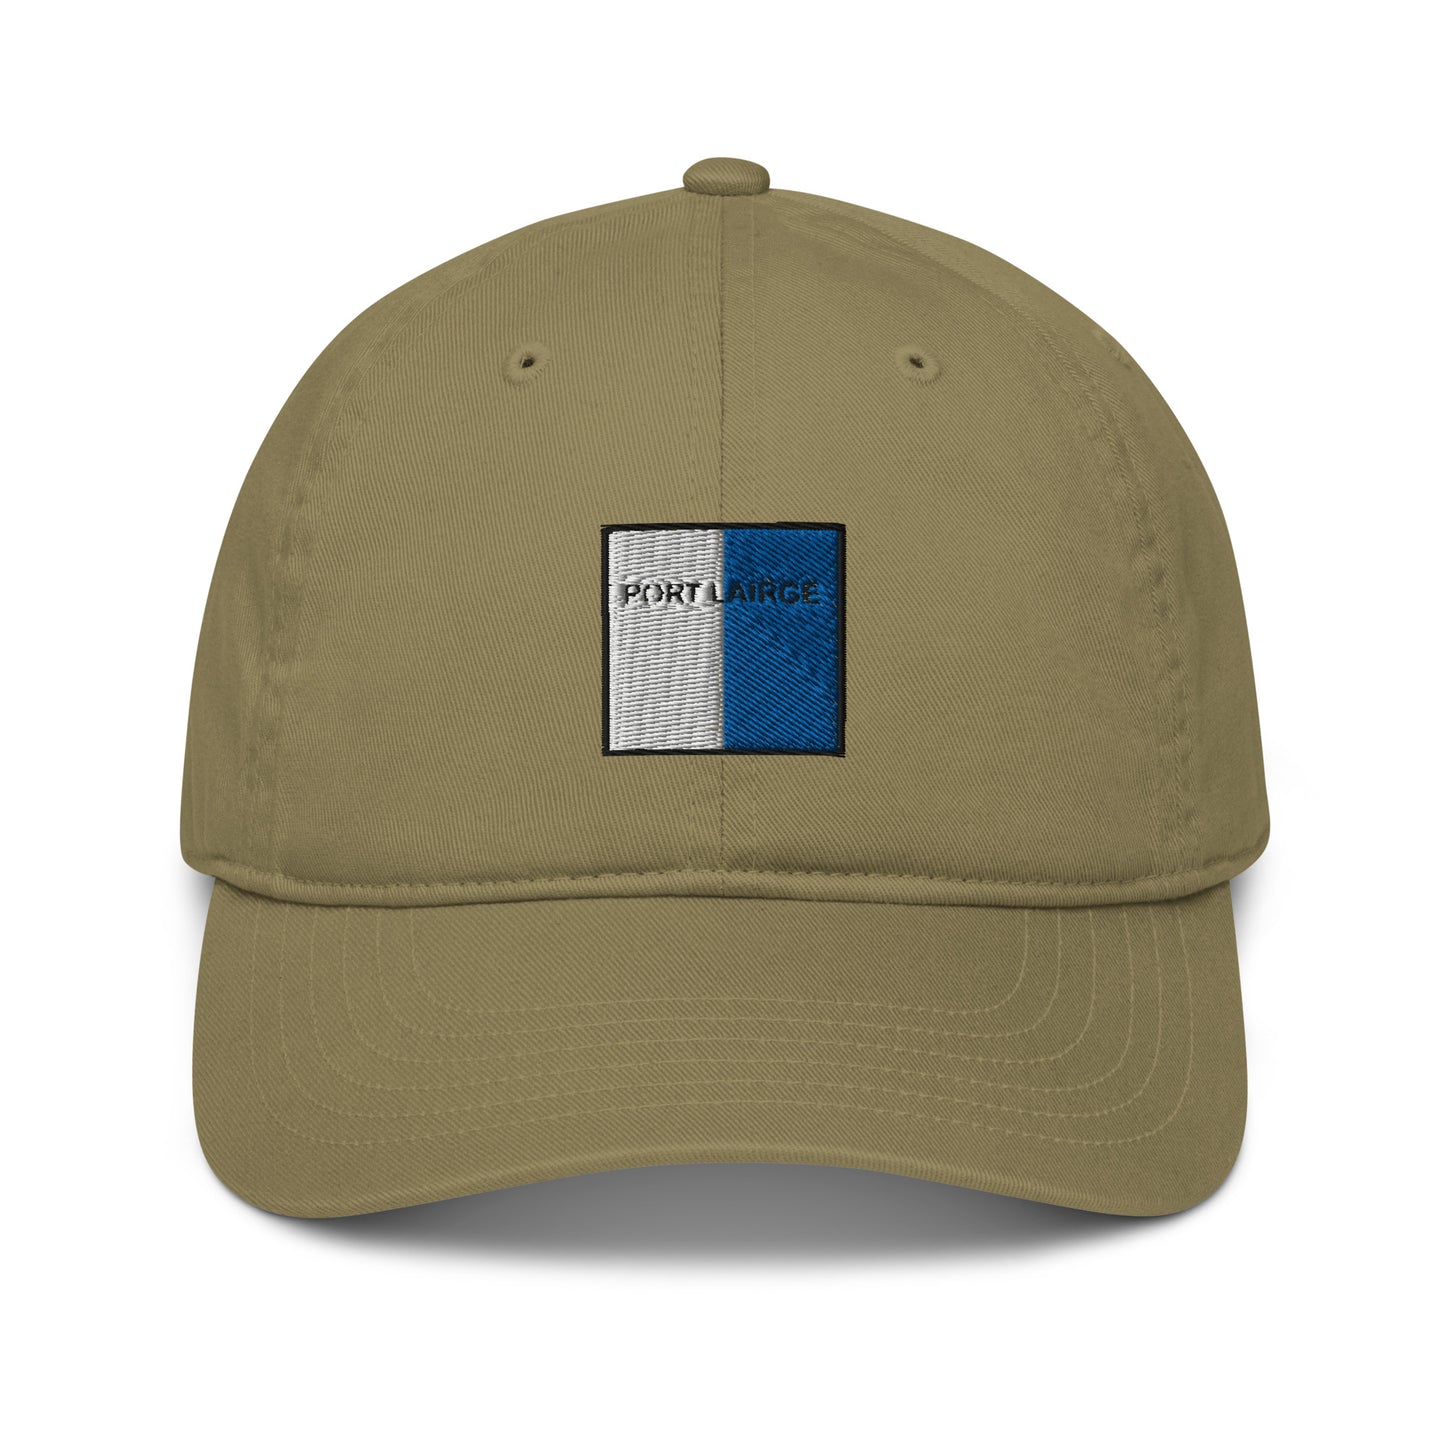 Embroidered Port Láirge Baseball Hat - 100% organic cotton